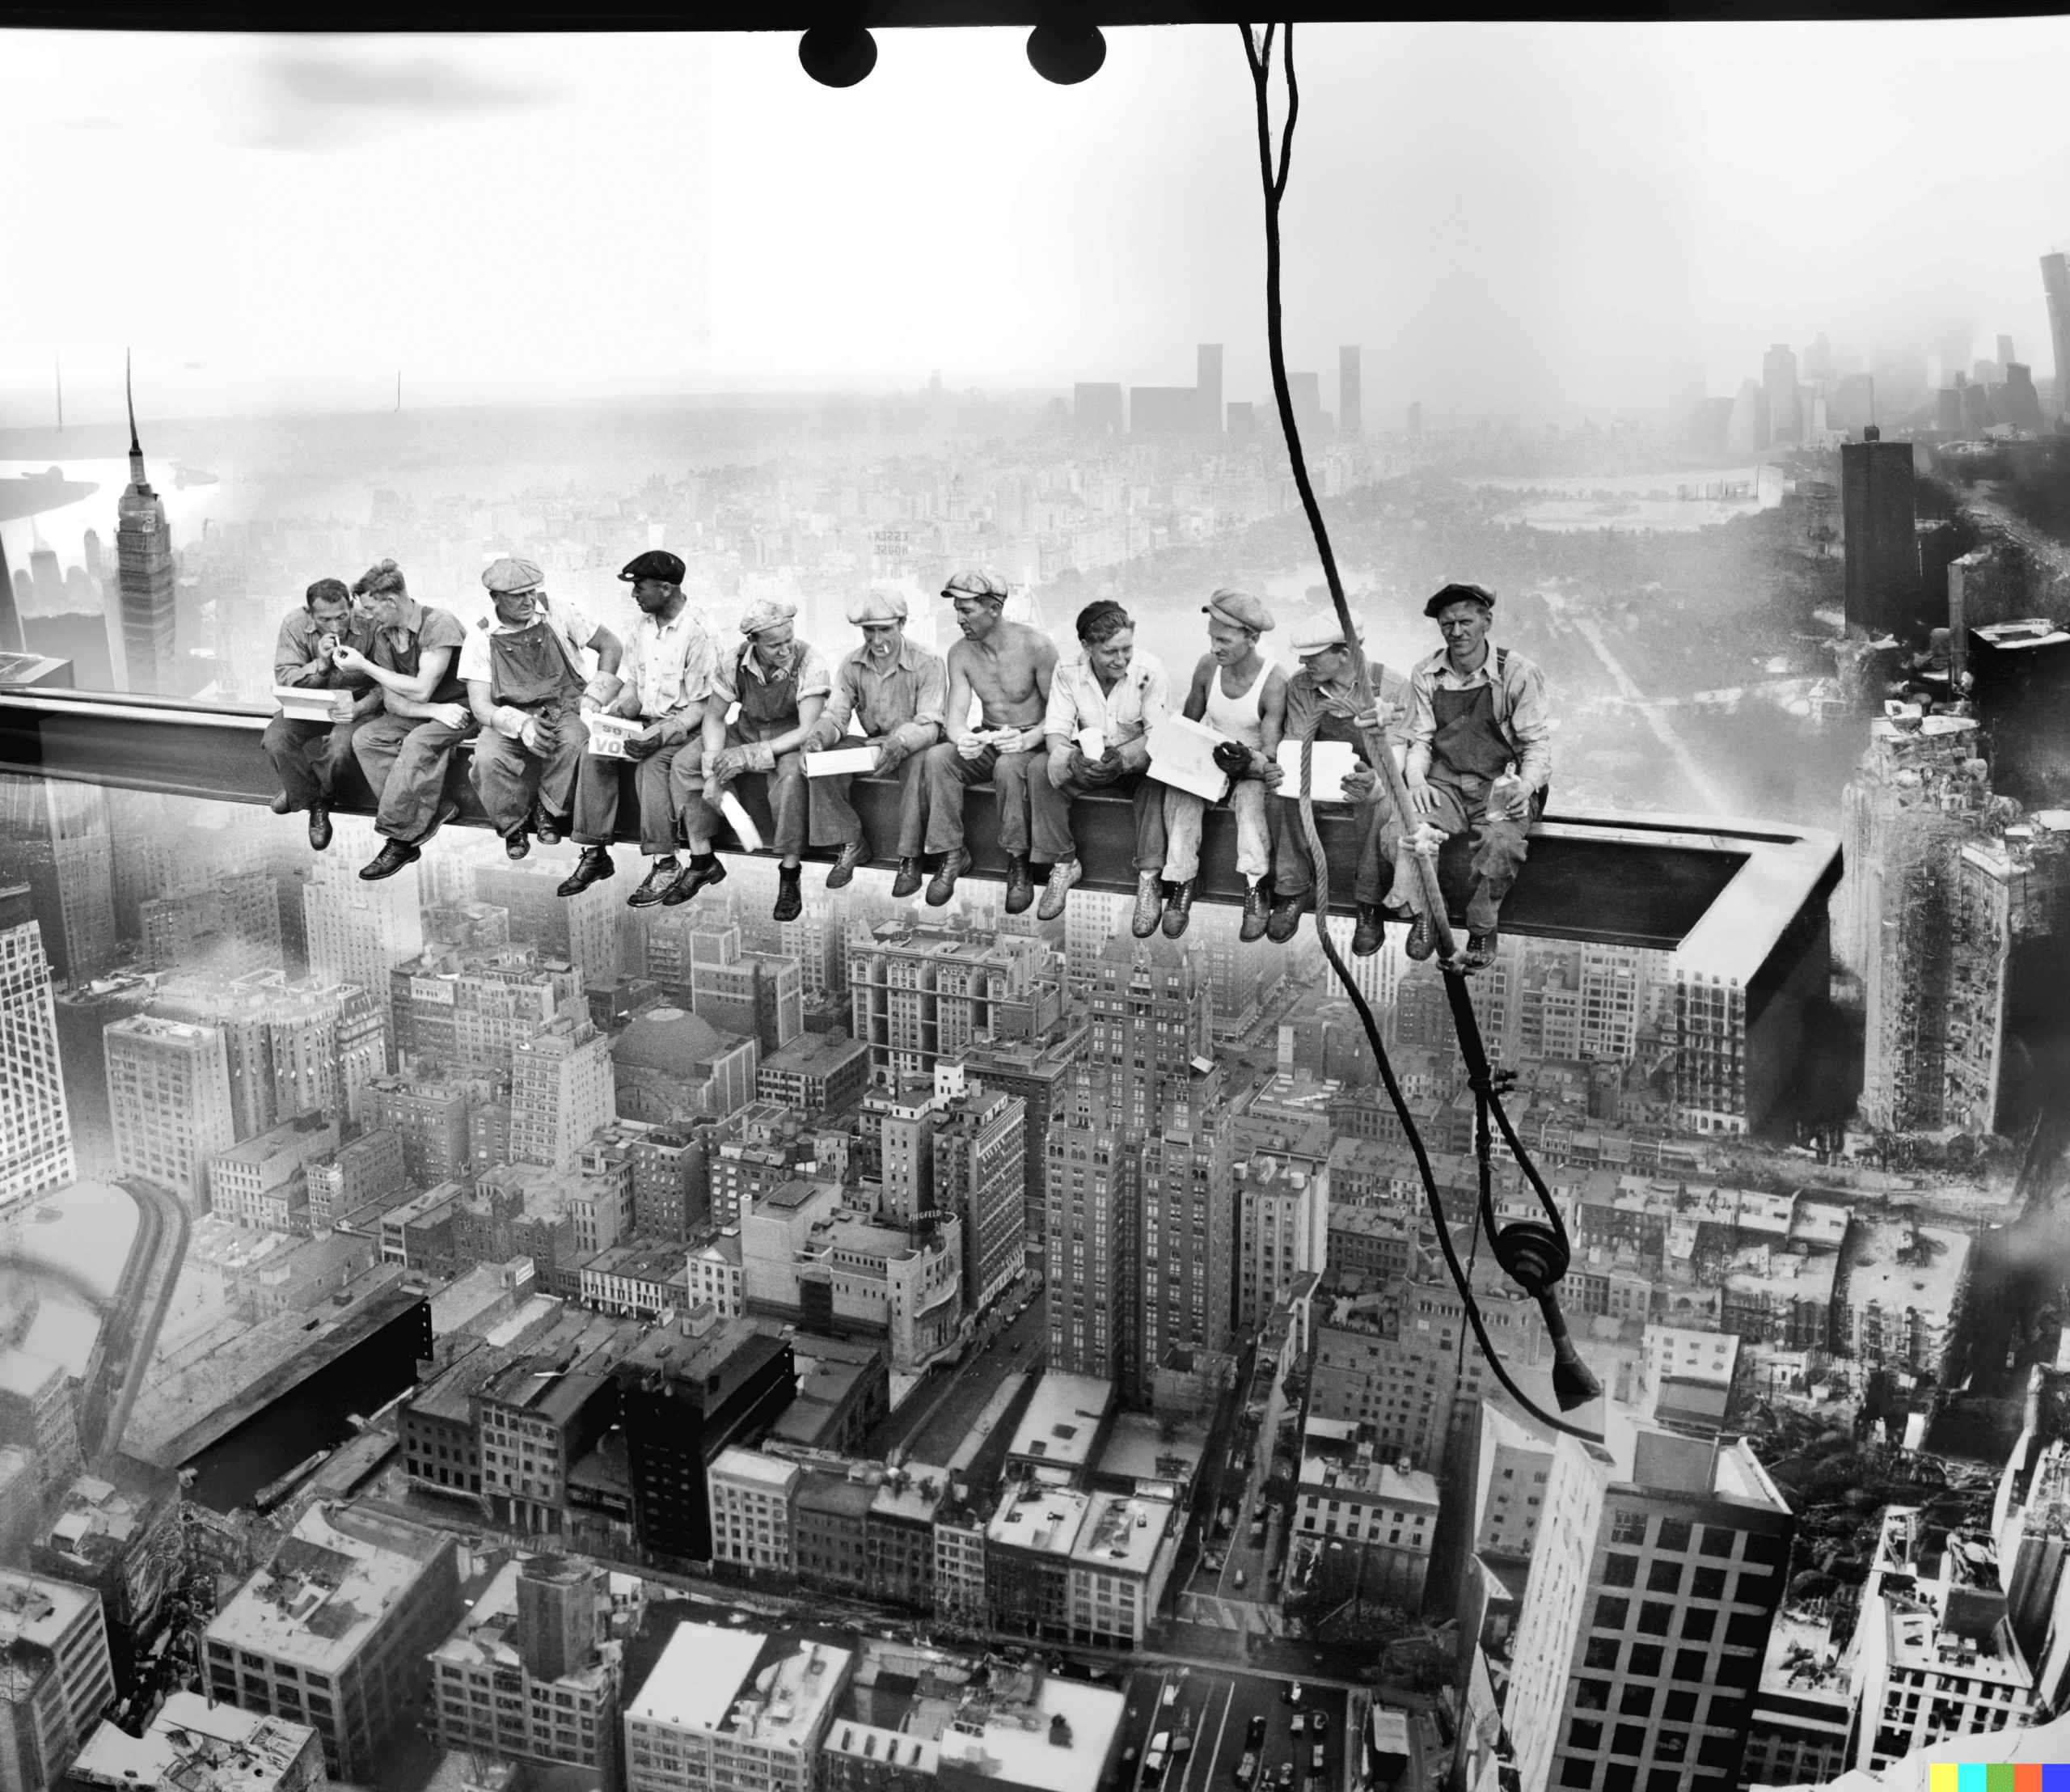 dalle-2 outpainted images of a photo of lunch atop a Skyscraper, a black-and-white photograph taken on September 20, 1932